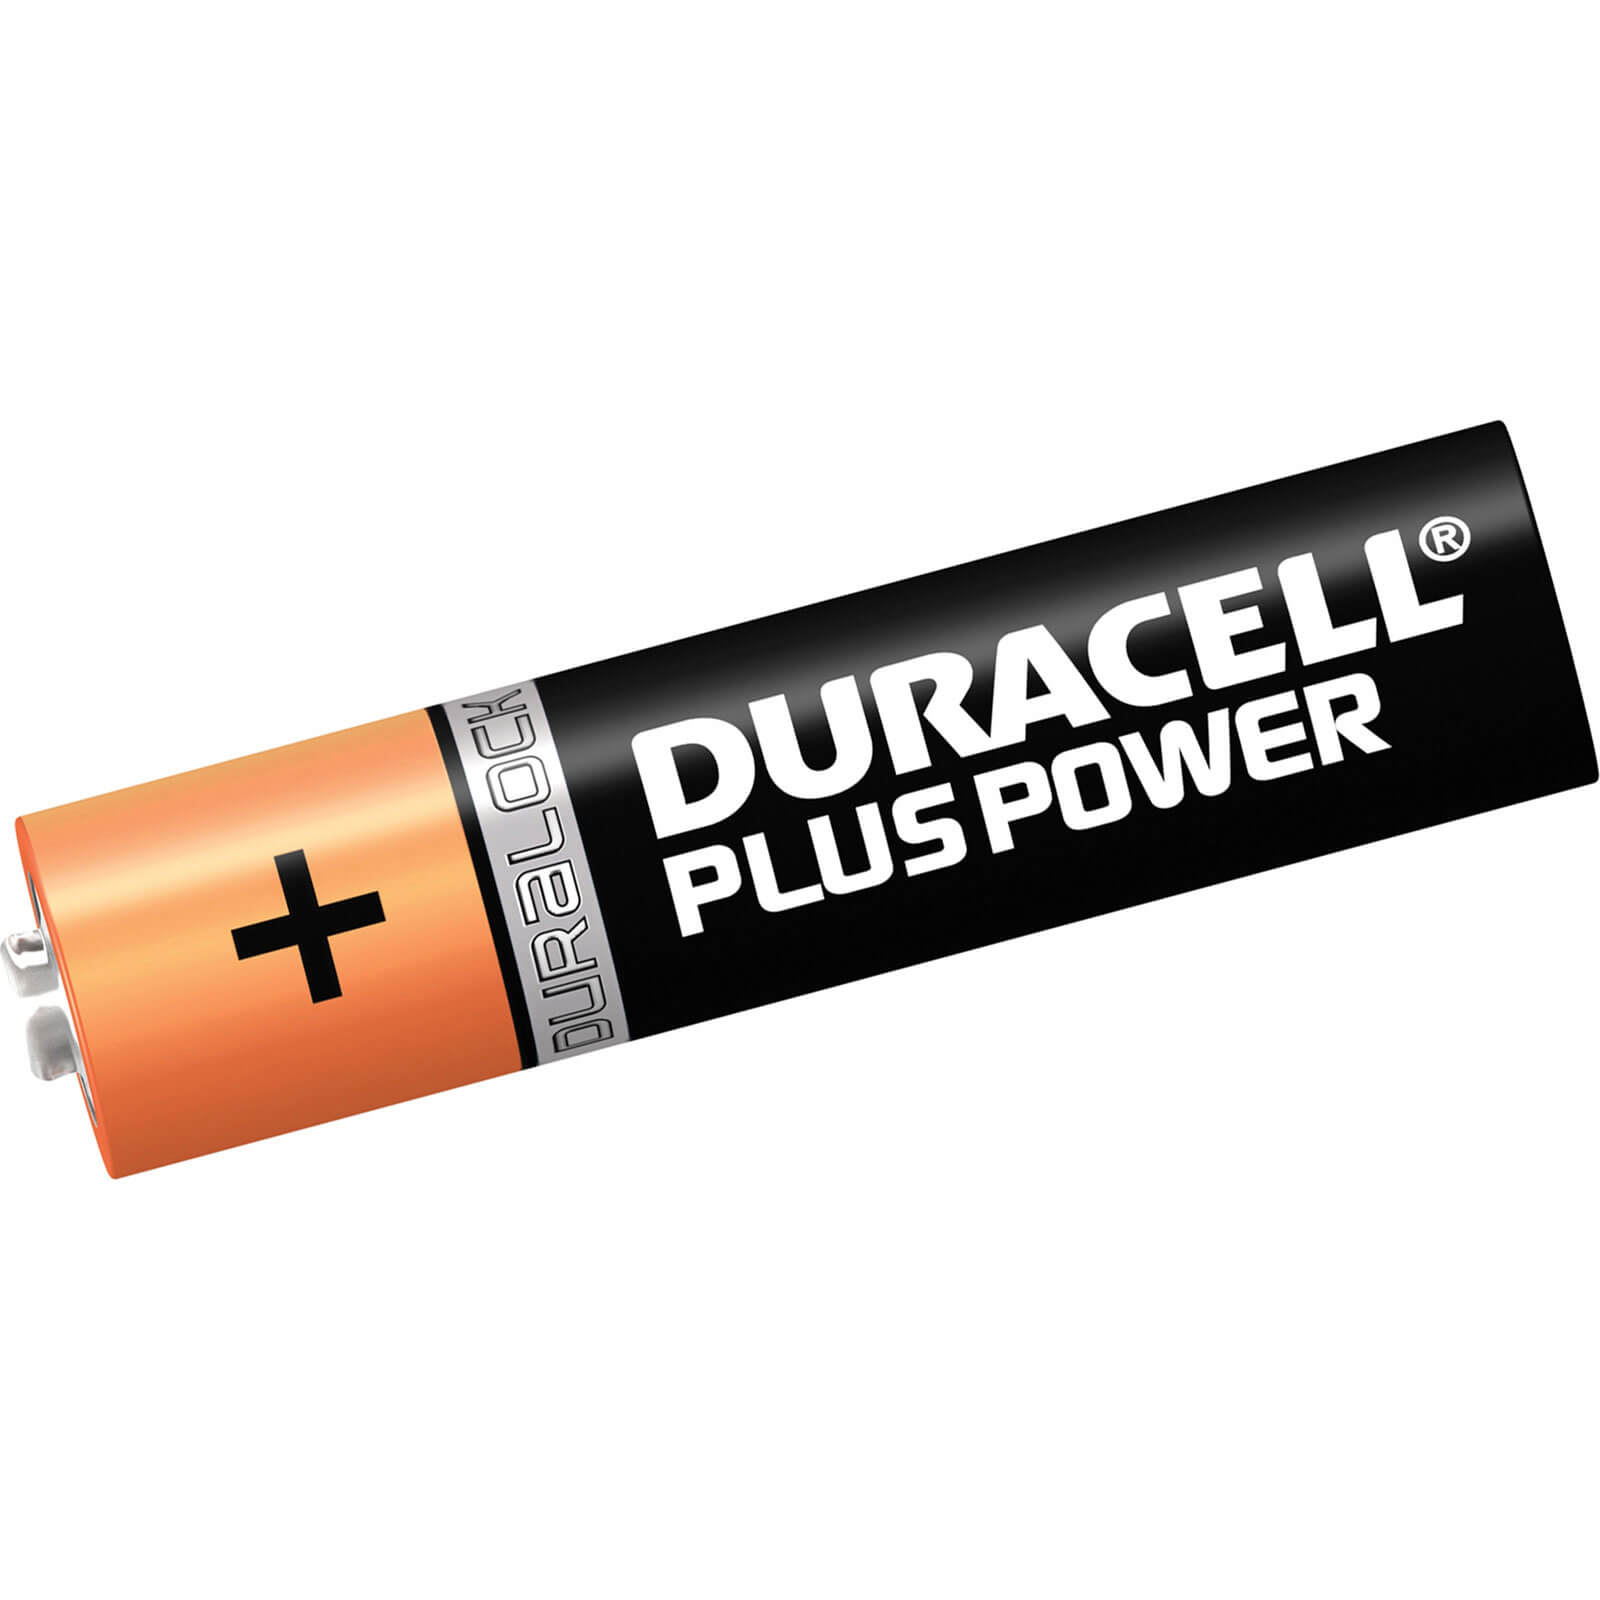 Duracell Aaa Cell Plus Power Batteries Batteries